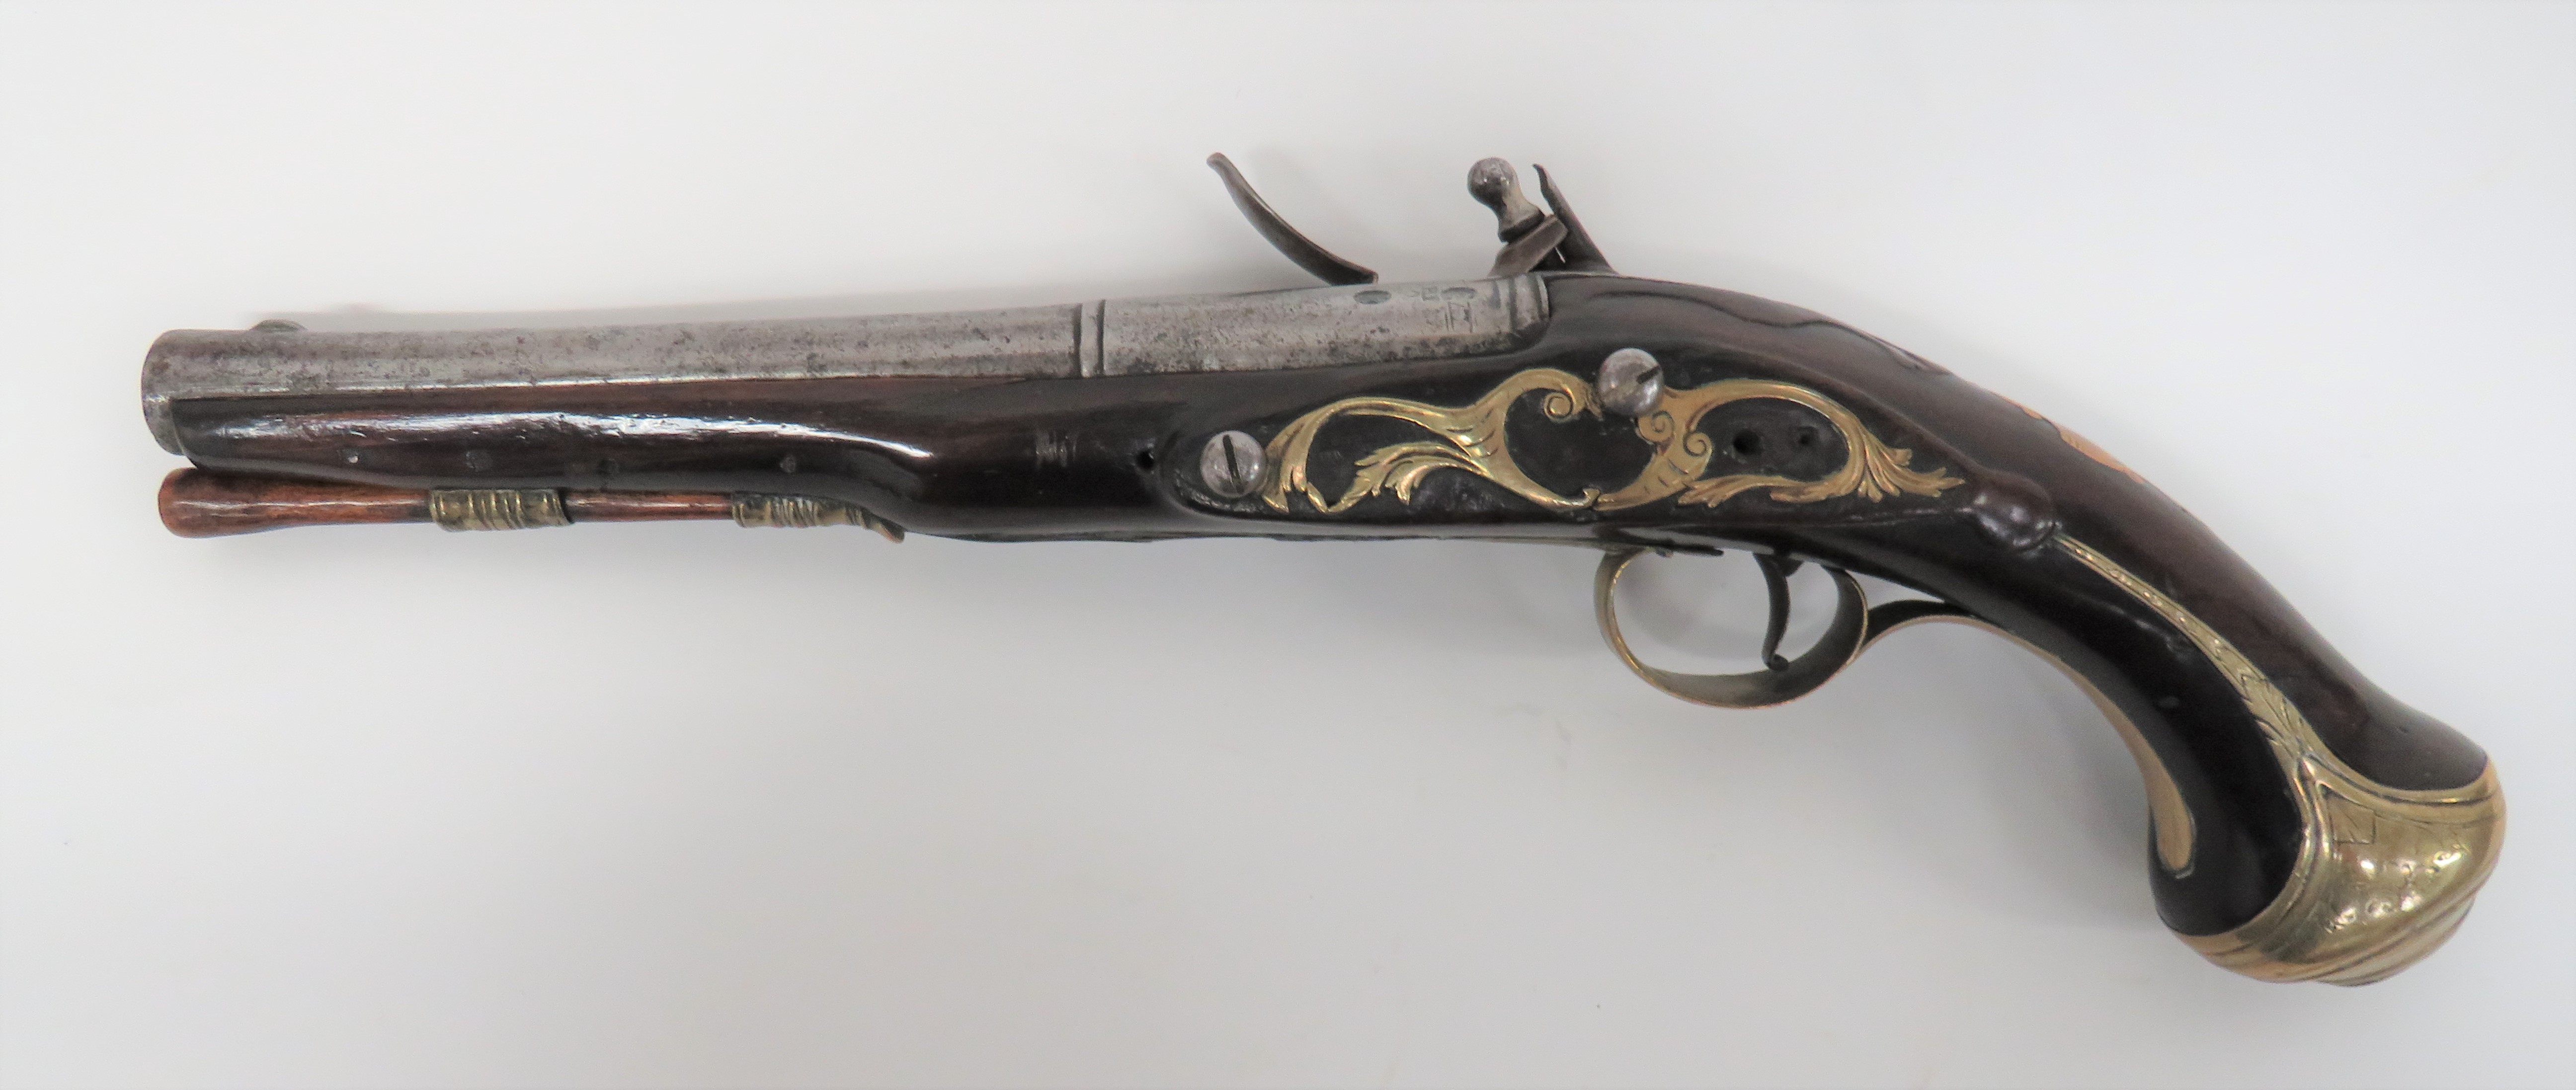 Late 18th Century Flintlock Holster Pistol 20 bore, 8 inch, cannon barrel.  The breech with two - Image 3 of 3